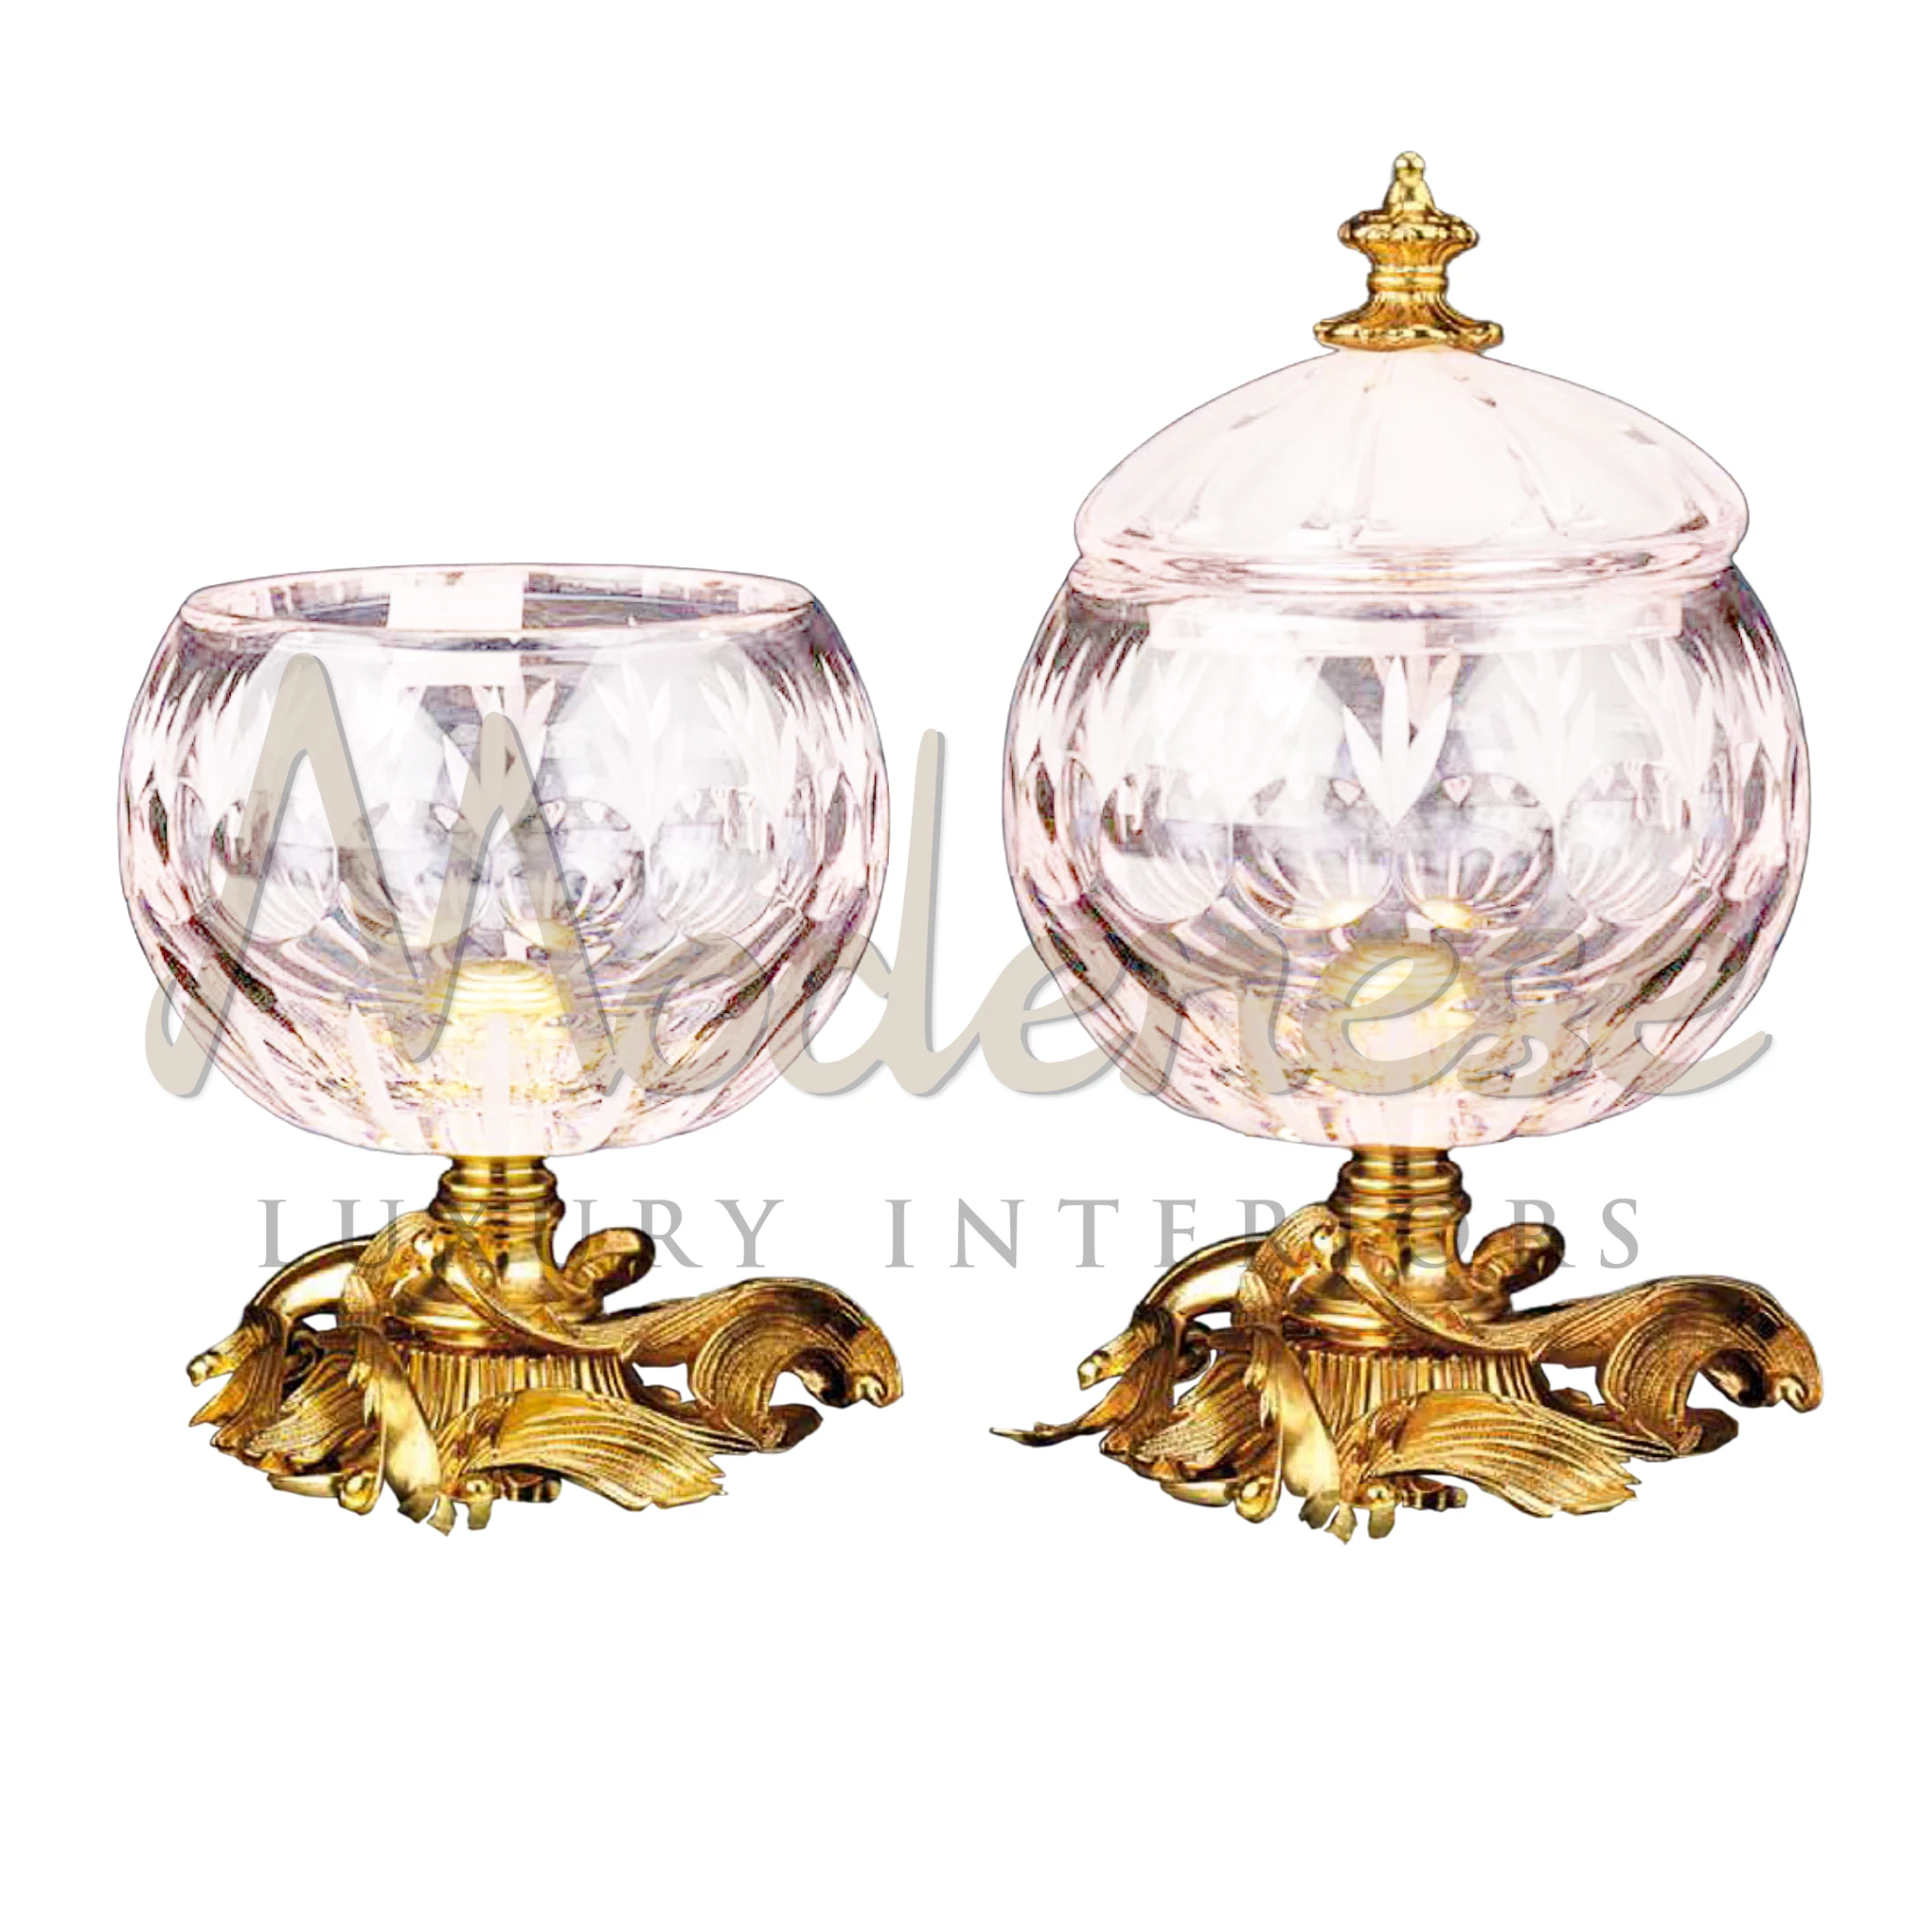 Luxury Pink Glass Vase Set, an elegant collection of vases in varying shapes and designs, perfect for adding cohesive sophistication to any interior design.